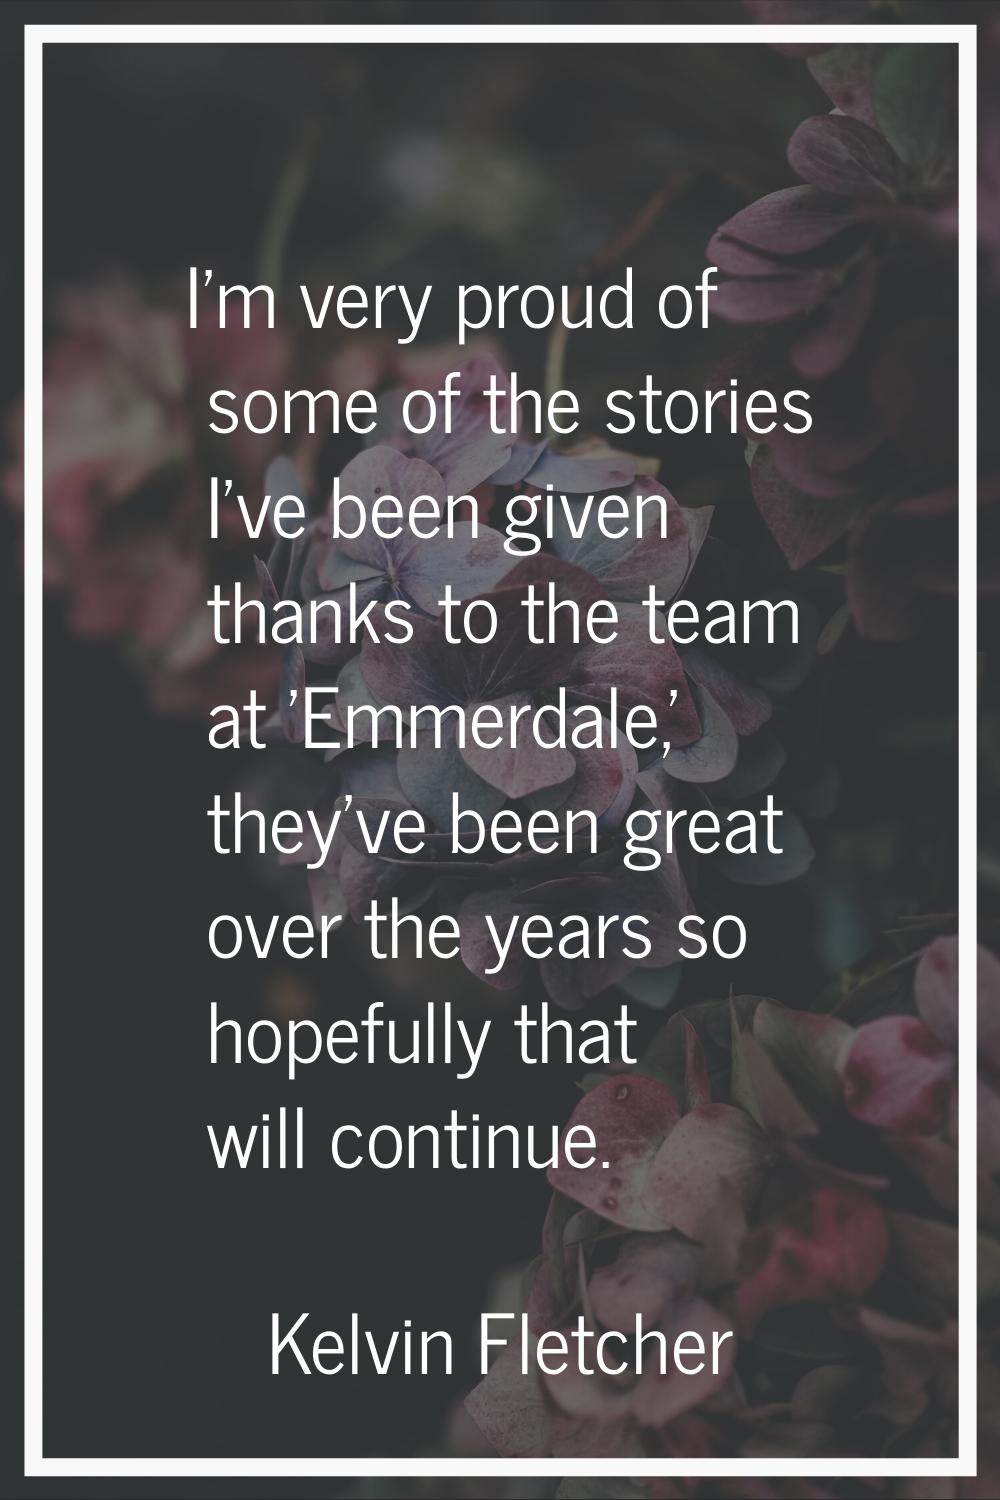 I'm very proud of some of the stories I've been given thanks to the team at 'Emmerdale,' they've be